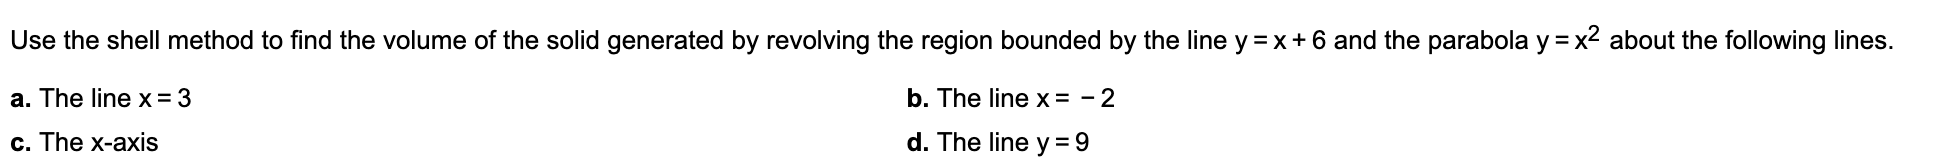 Use the shell method to find the volume of the solid generated by revolving the region bounded by the line y
x 6 and the parabola y = x2 about the following lines.
a. The line x = 3
b. The line x = - 2
d. The line y 9
c. The x-axis
